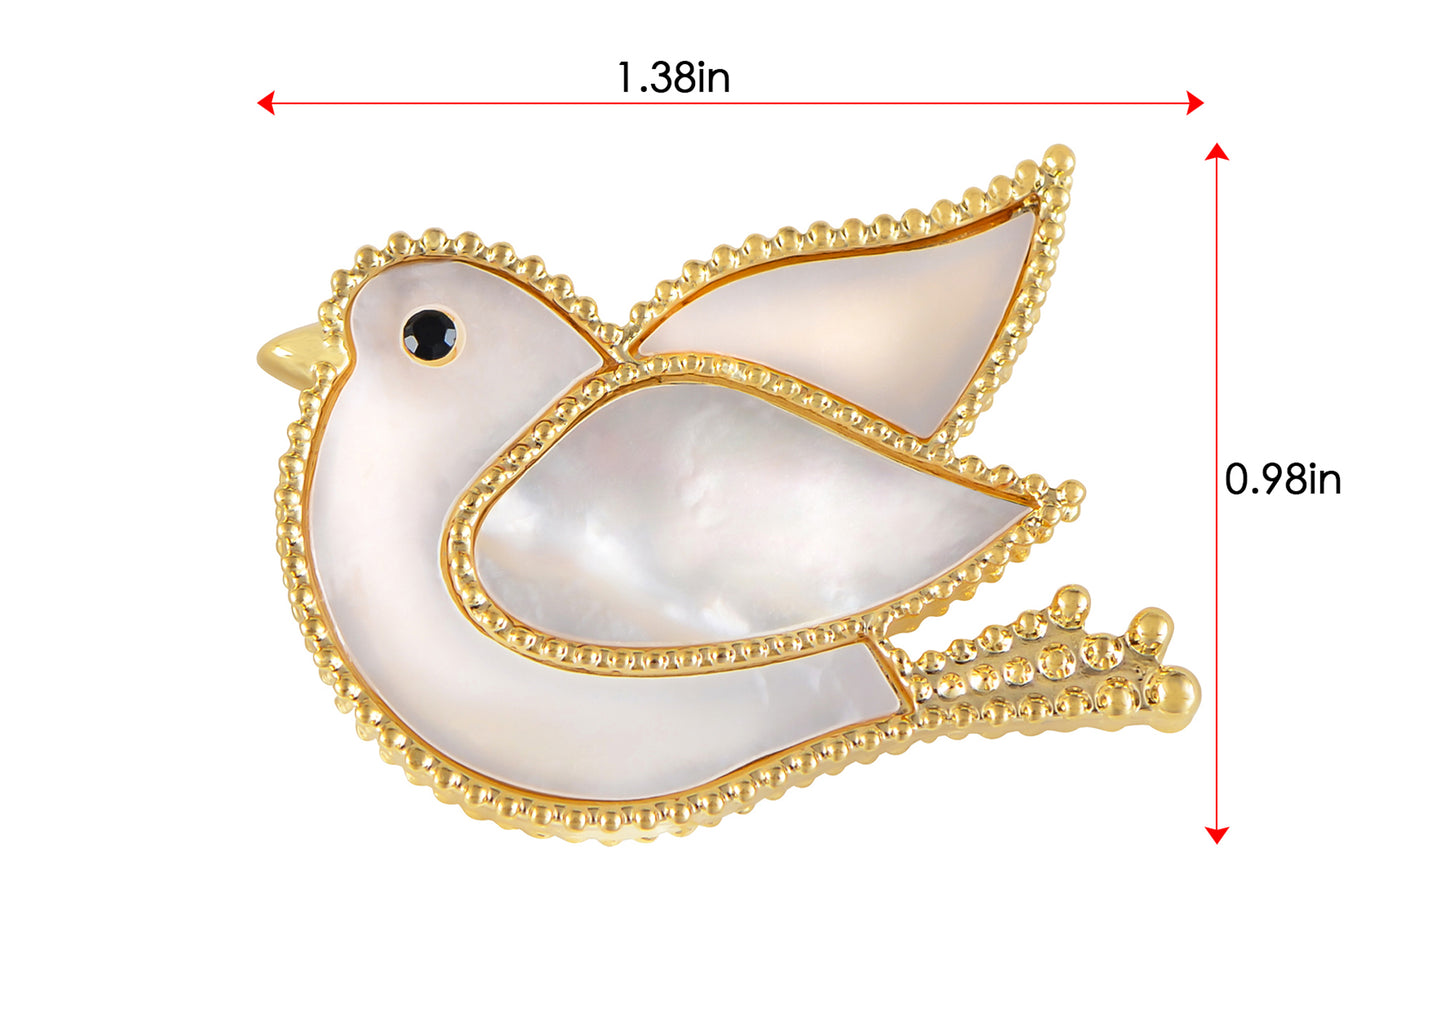 Alilang Seashell Crystal Rhinestones Flying Dove Bird Pin Brooch For Women Girls Cute Animal Jackets Hat Badges Brooches Pins Lovely Jewelry